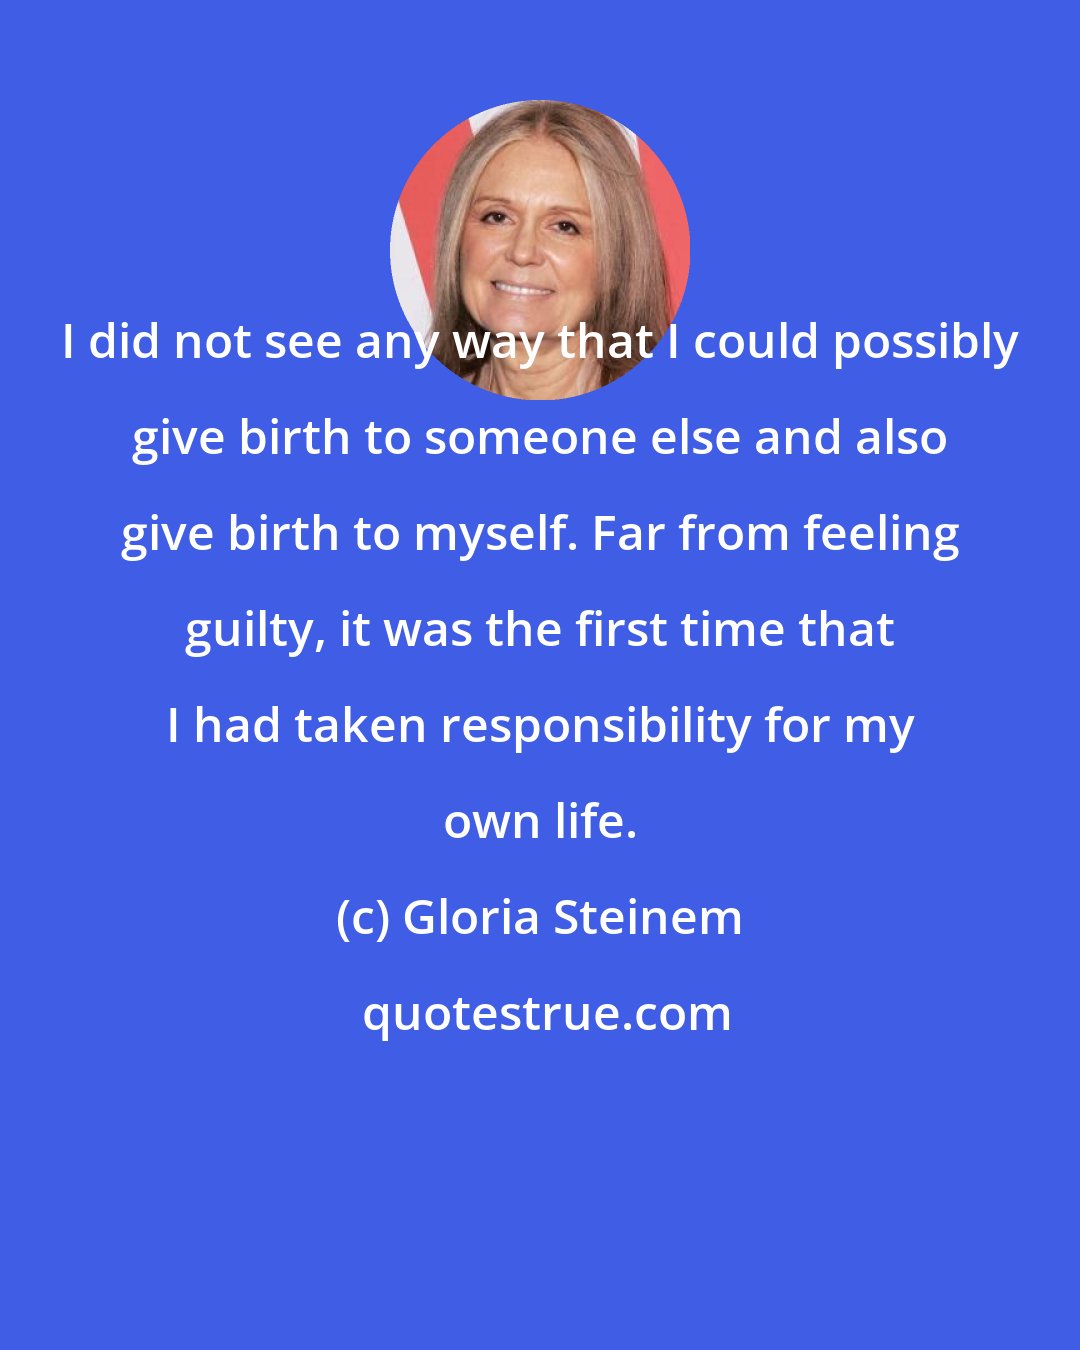 Gloria Steinem: I did not see any way that I could possibly give birth to someone else and also give birth to myself. Far from feeling guilty, it was the first time that I had taken responsibility for my own life.